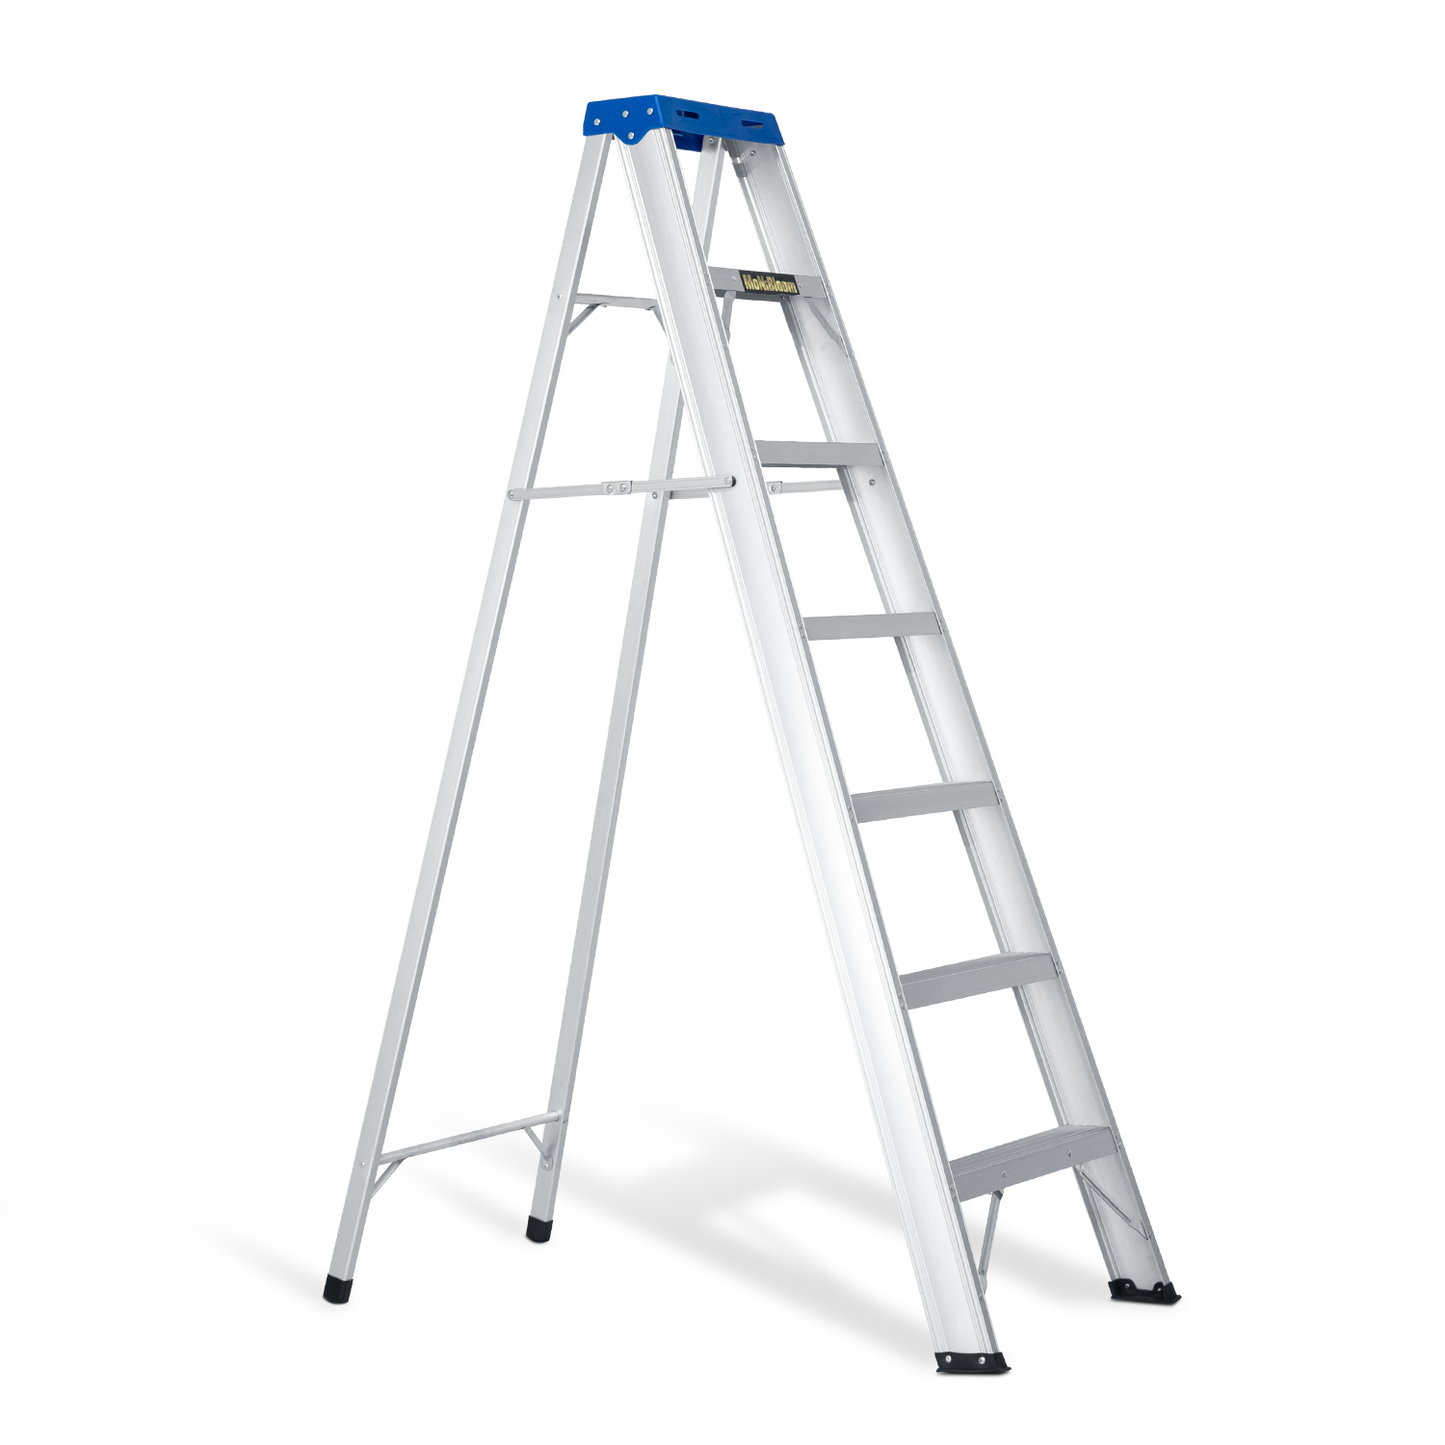 A-Frame Folding Ladder w/Tool Tray - 6 Steps 5.66 ft/67.9", Blue/Silver